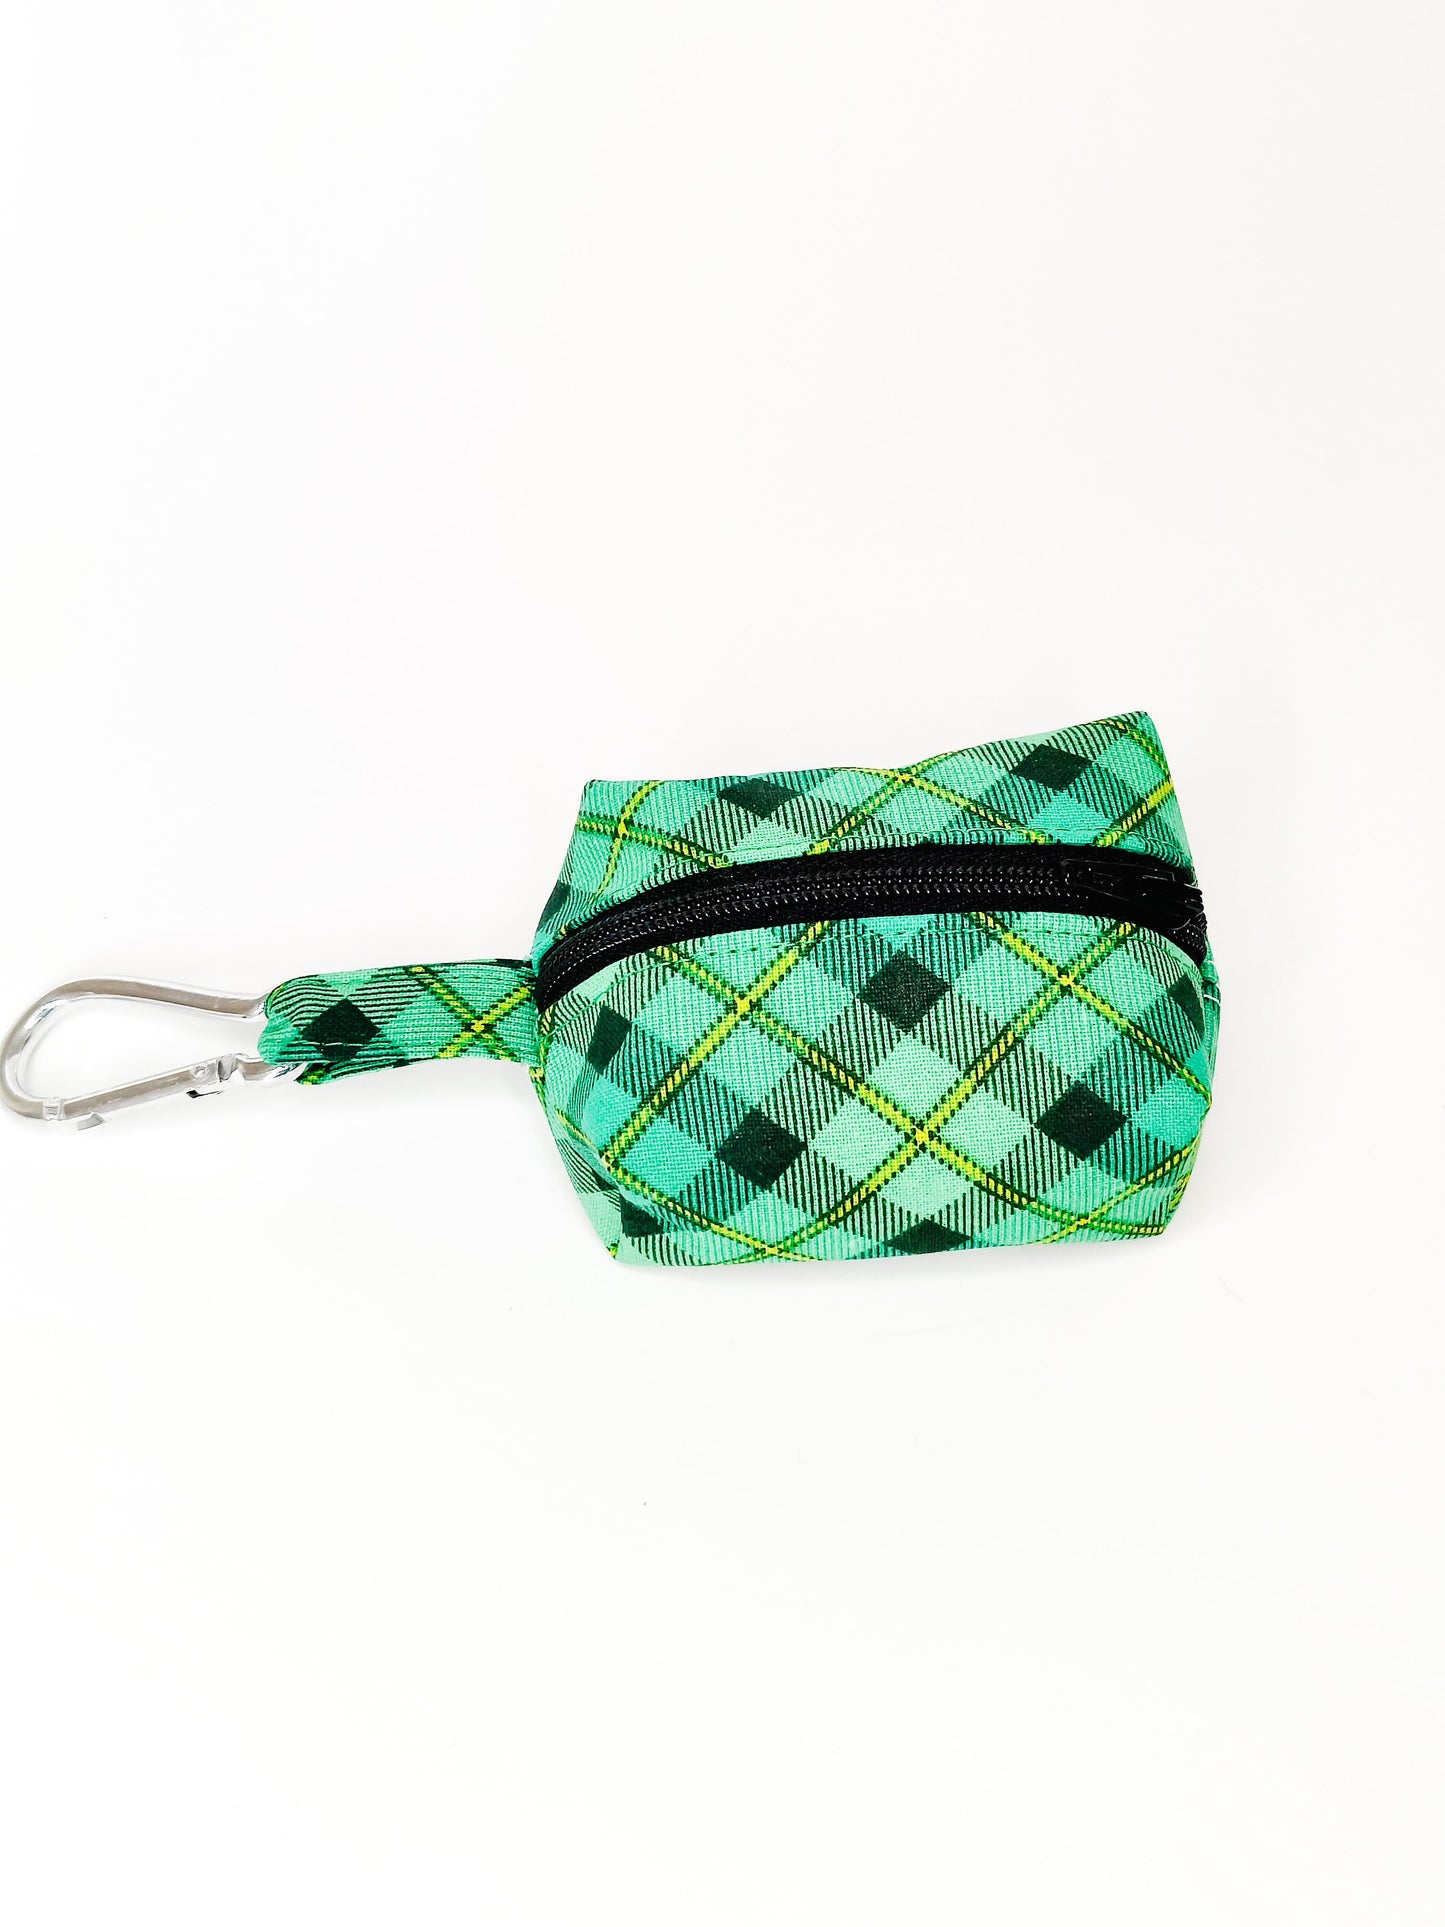 Paddy's Day Plaid Waste Bag Dispenser